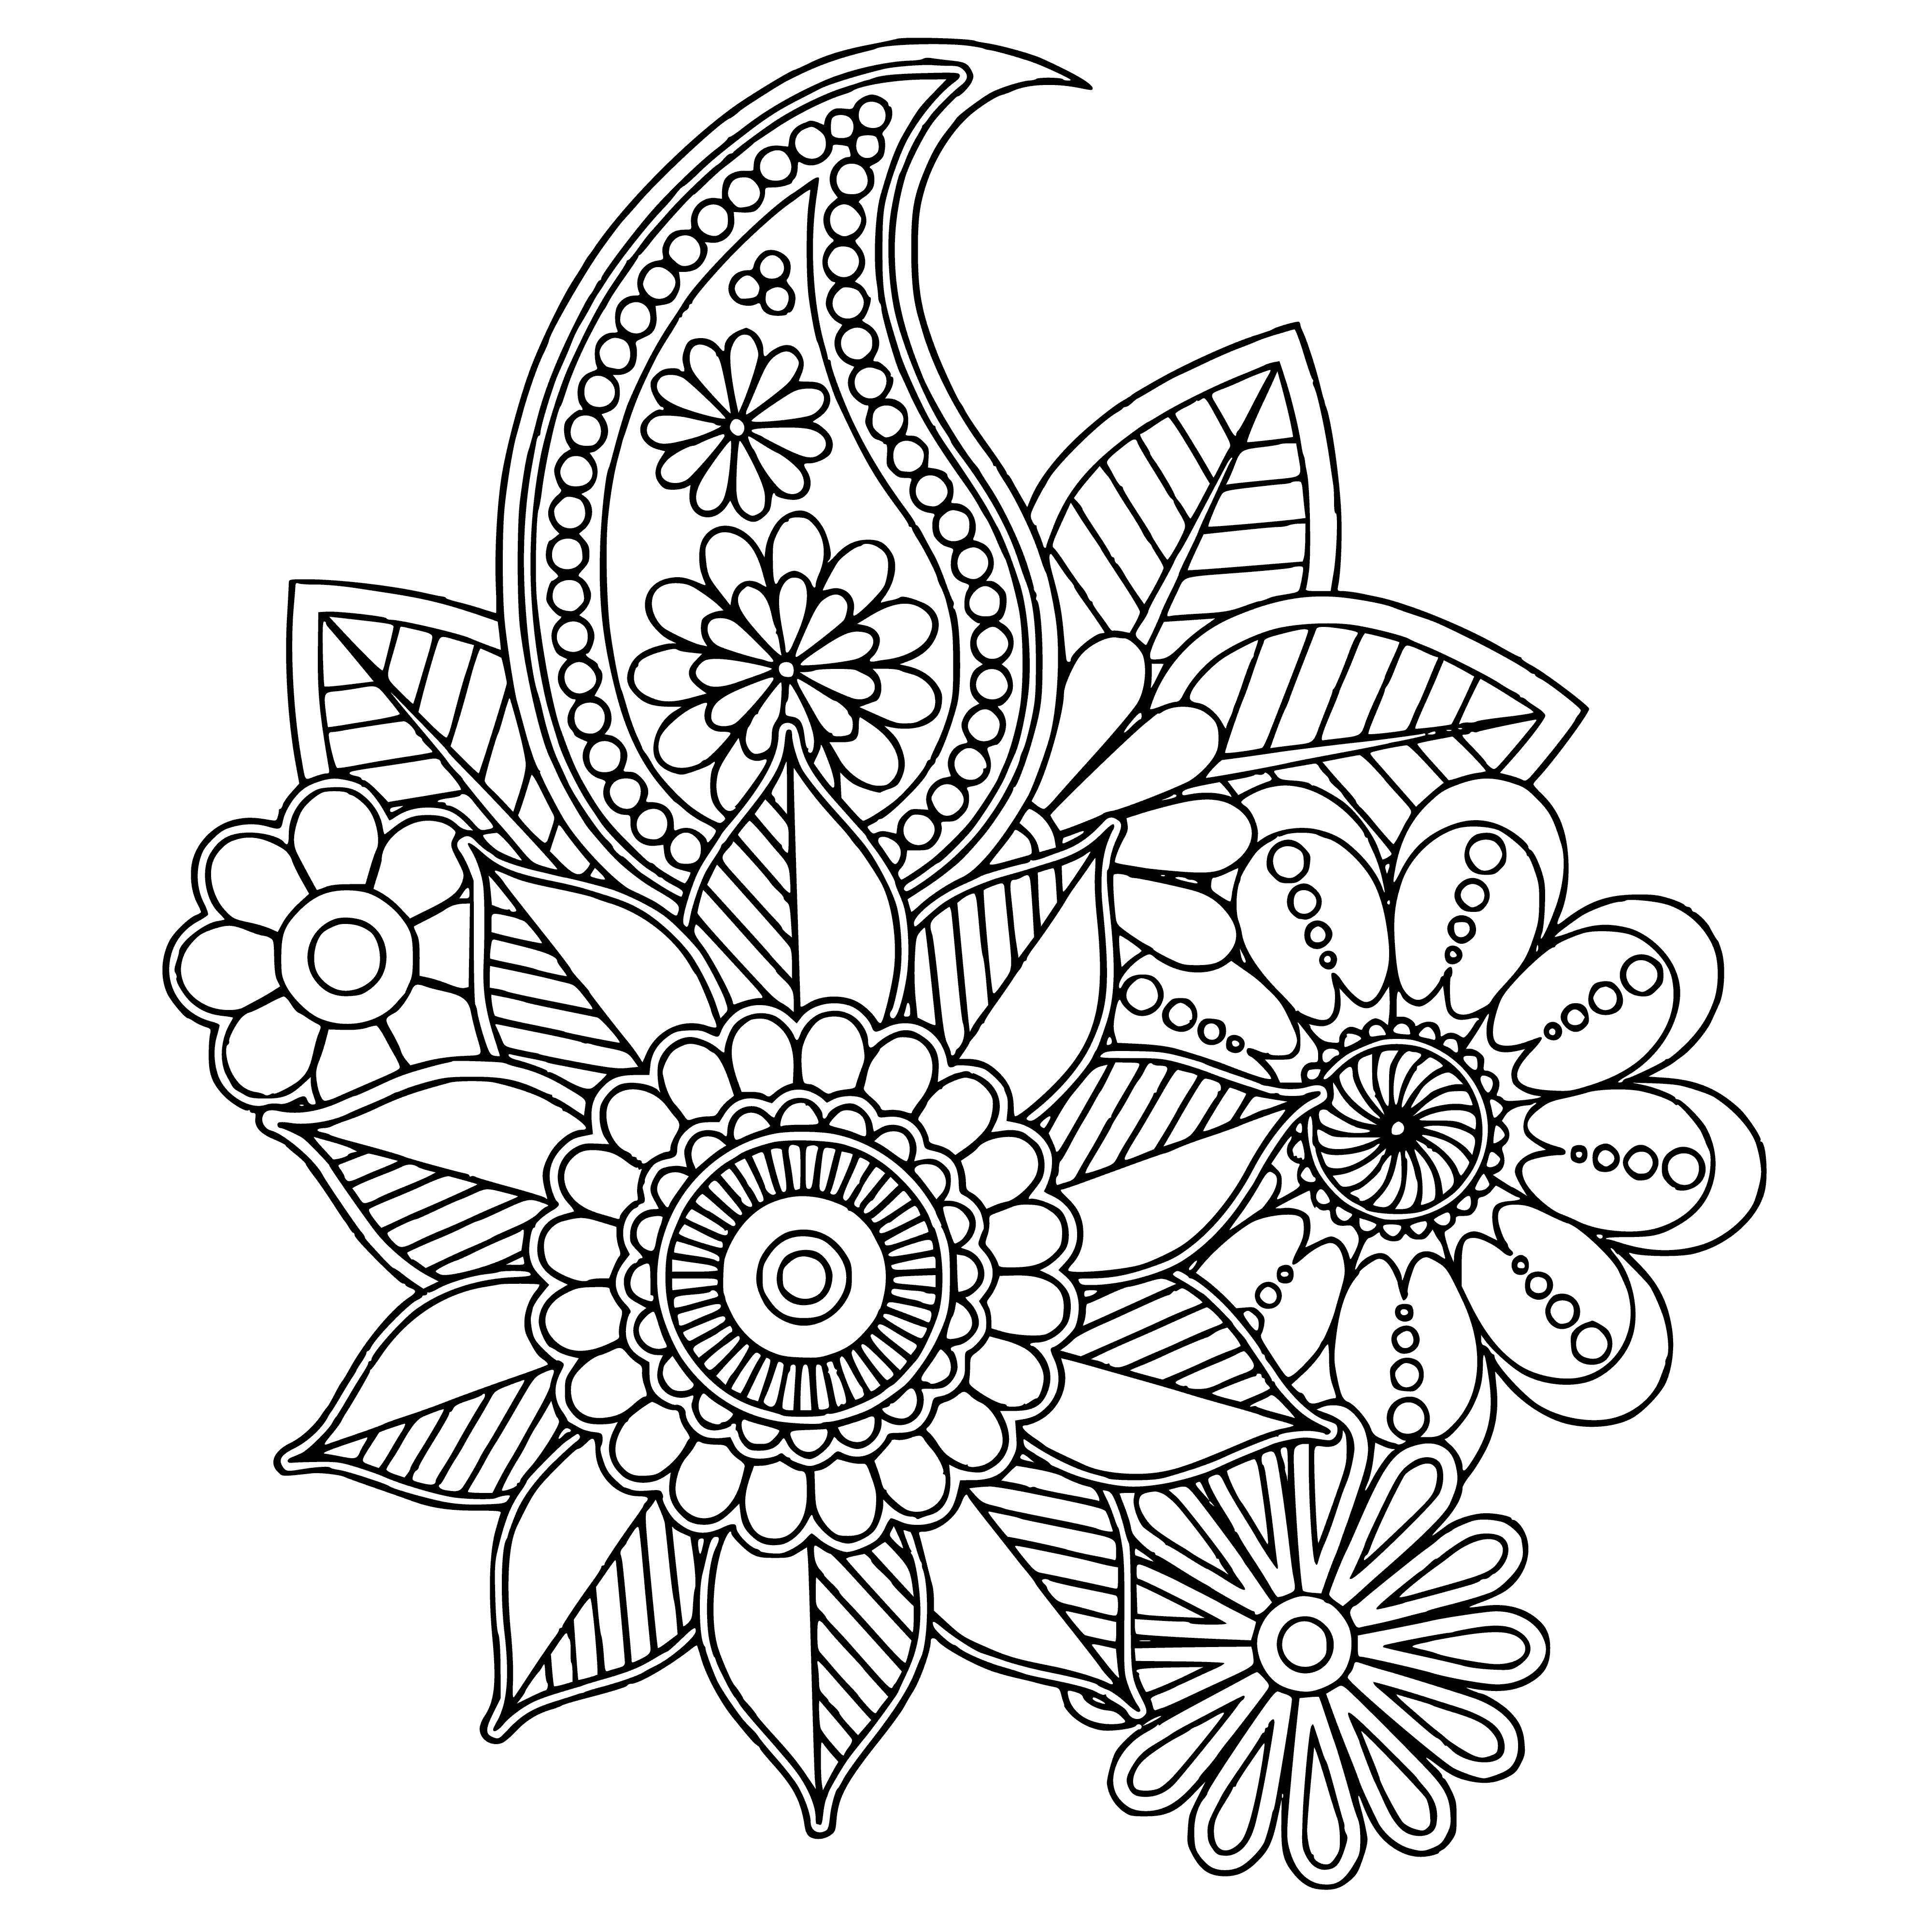 coloring page: A beautiful bouquet of flowers for you to personalize with an array of colors! Includes roses, daisies, and lilies with intricate details. #coloringpages #flowers